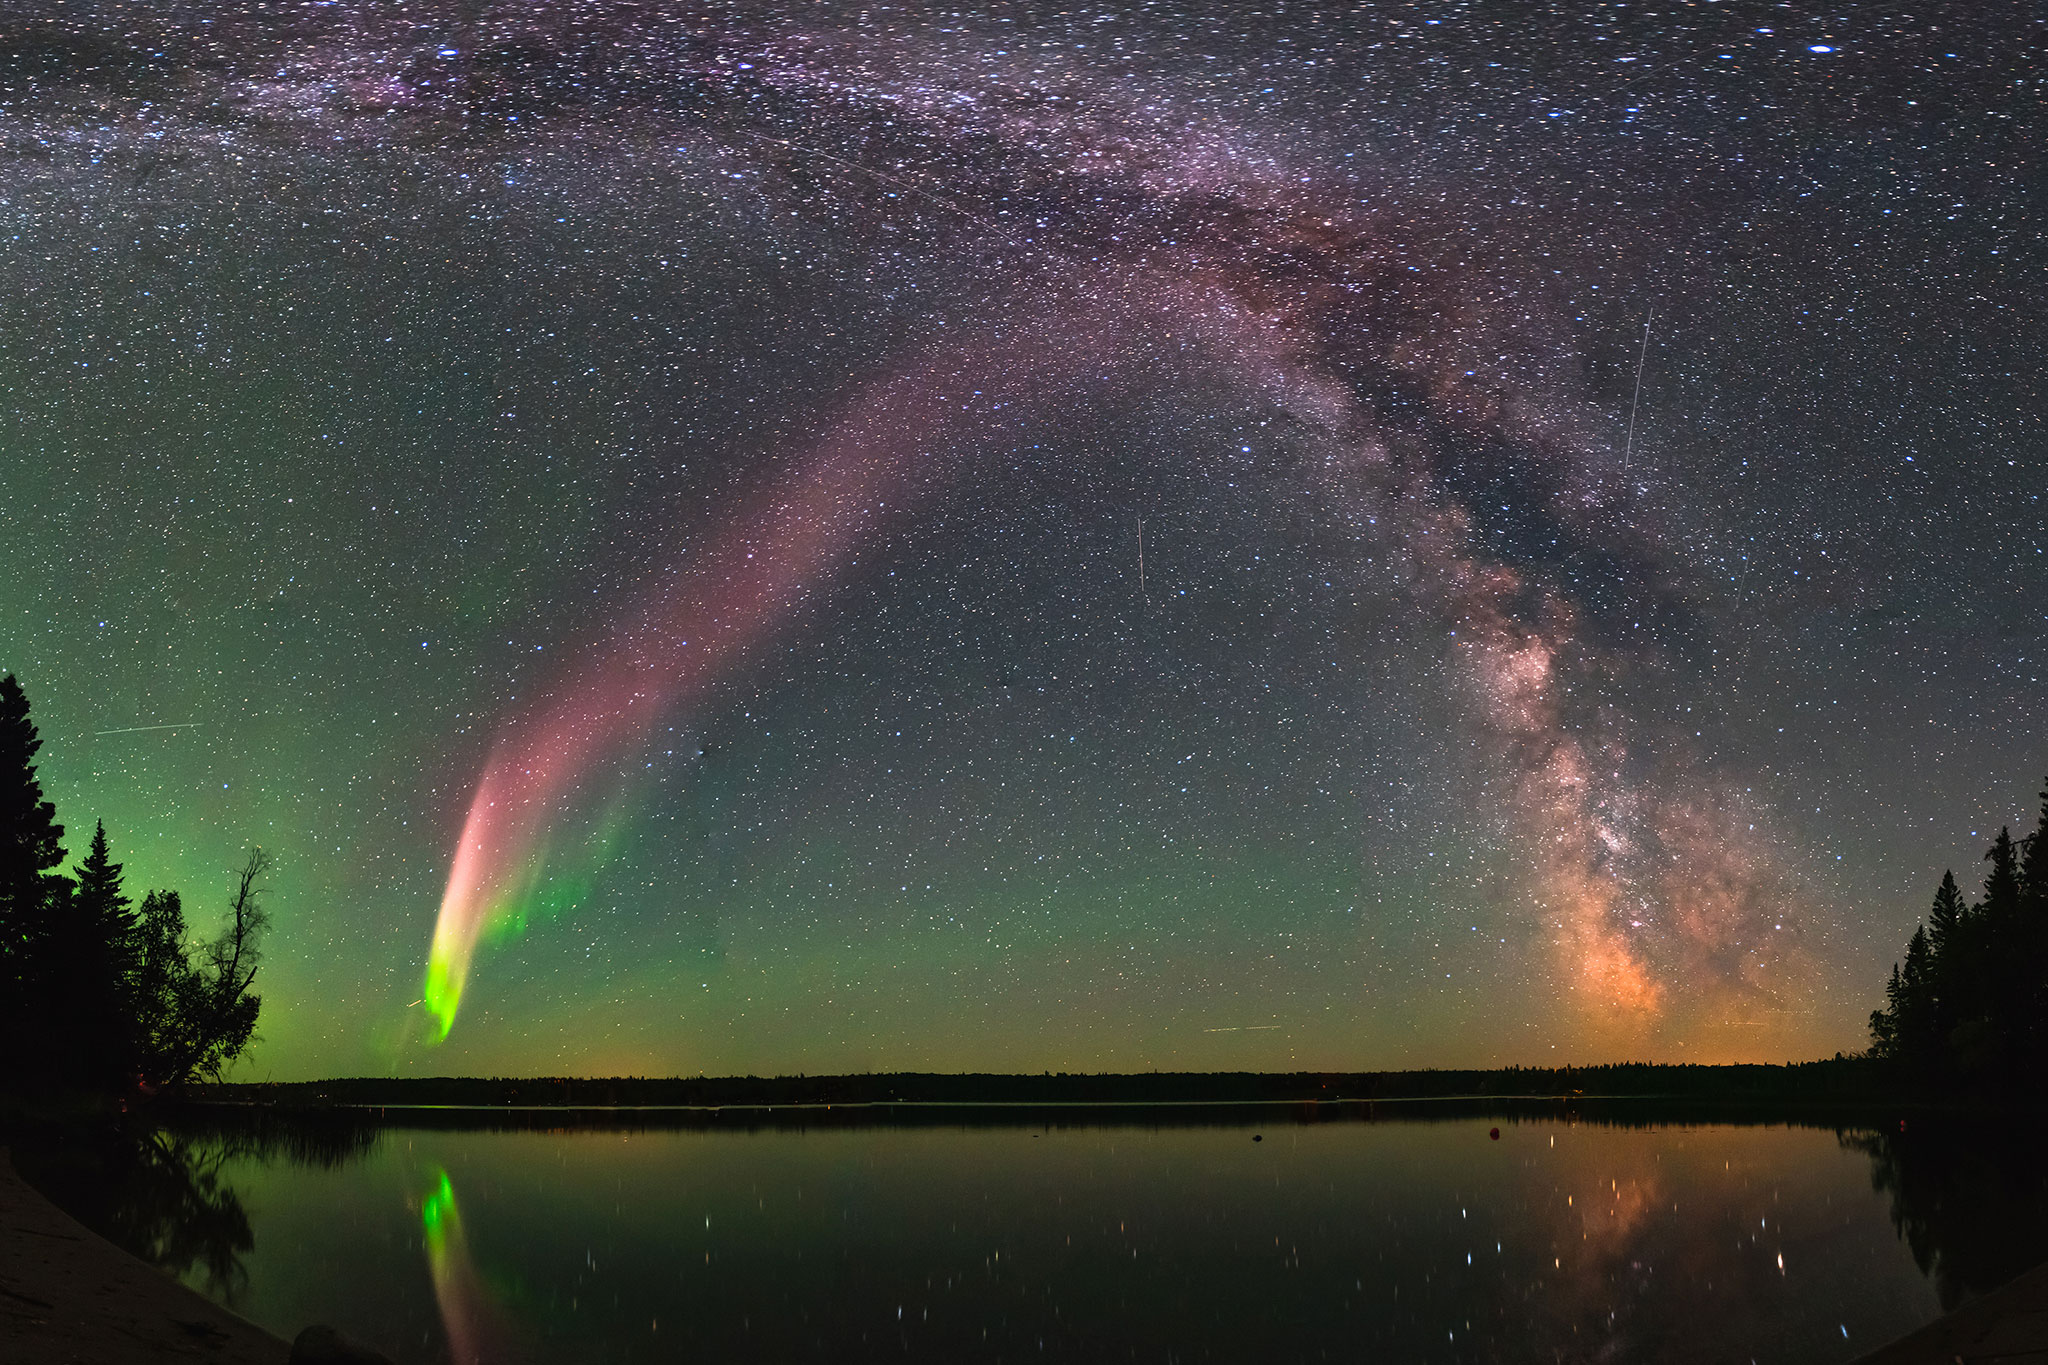 Steve,' a New Kind of Aurora, Was Found by Citizen Scientists